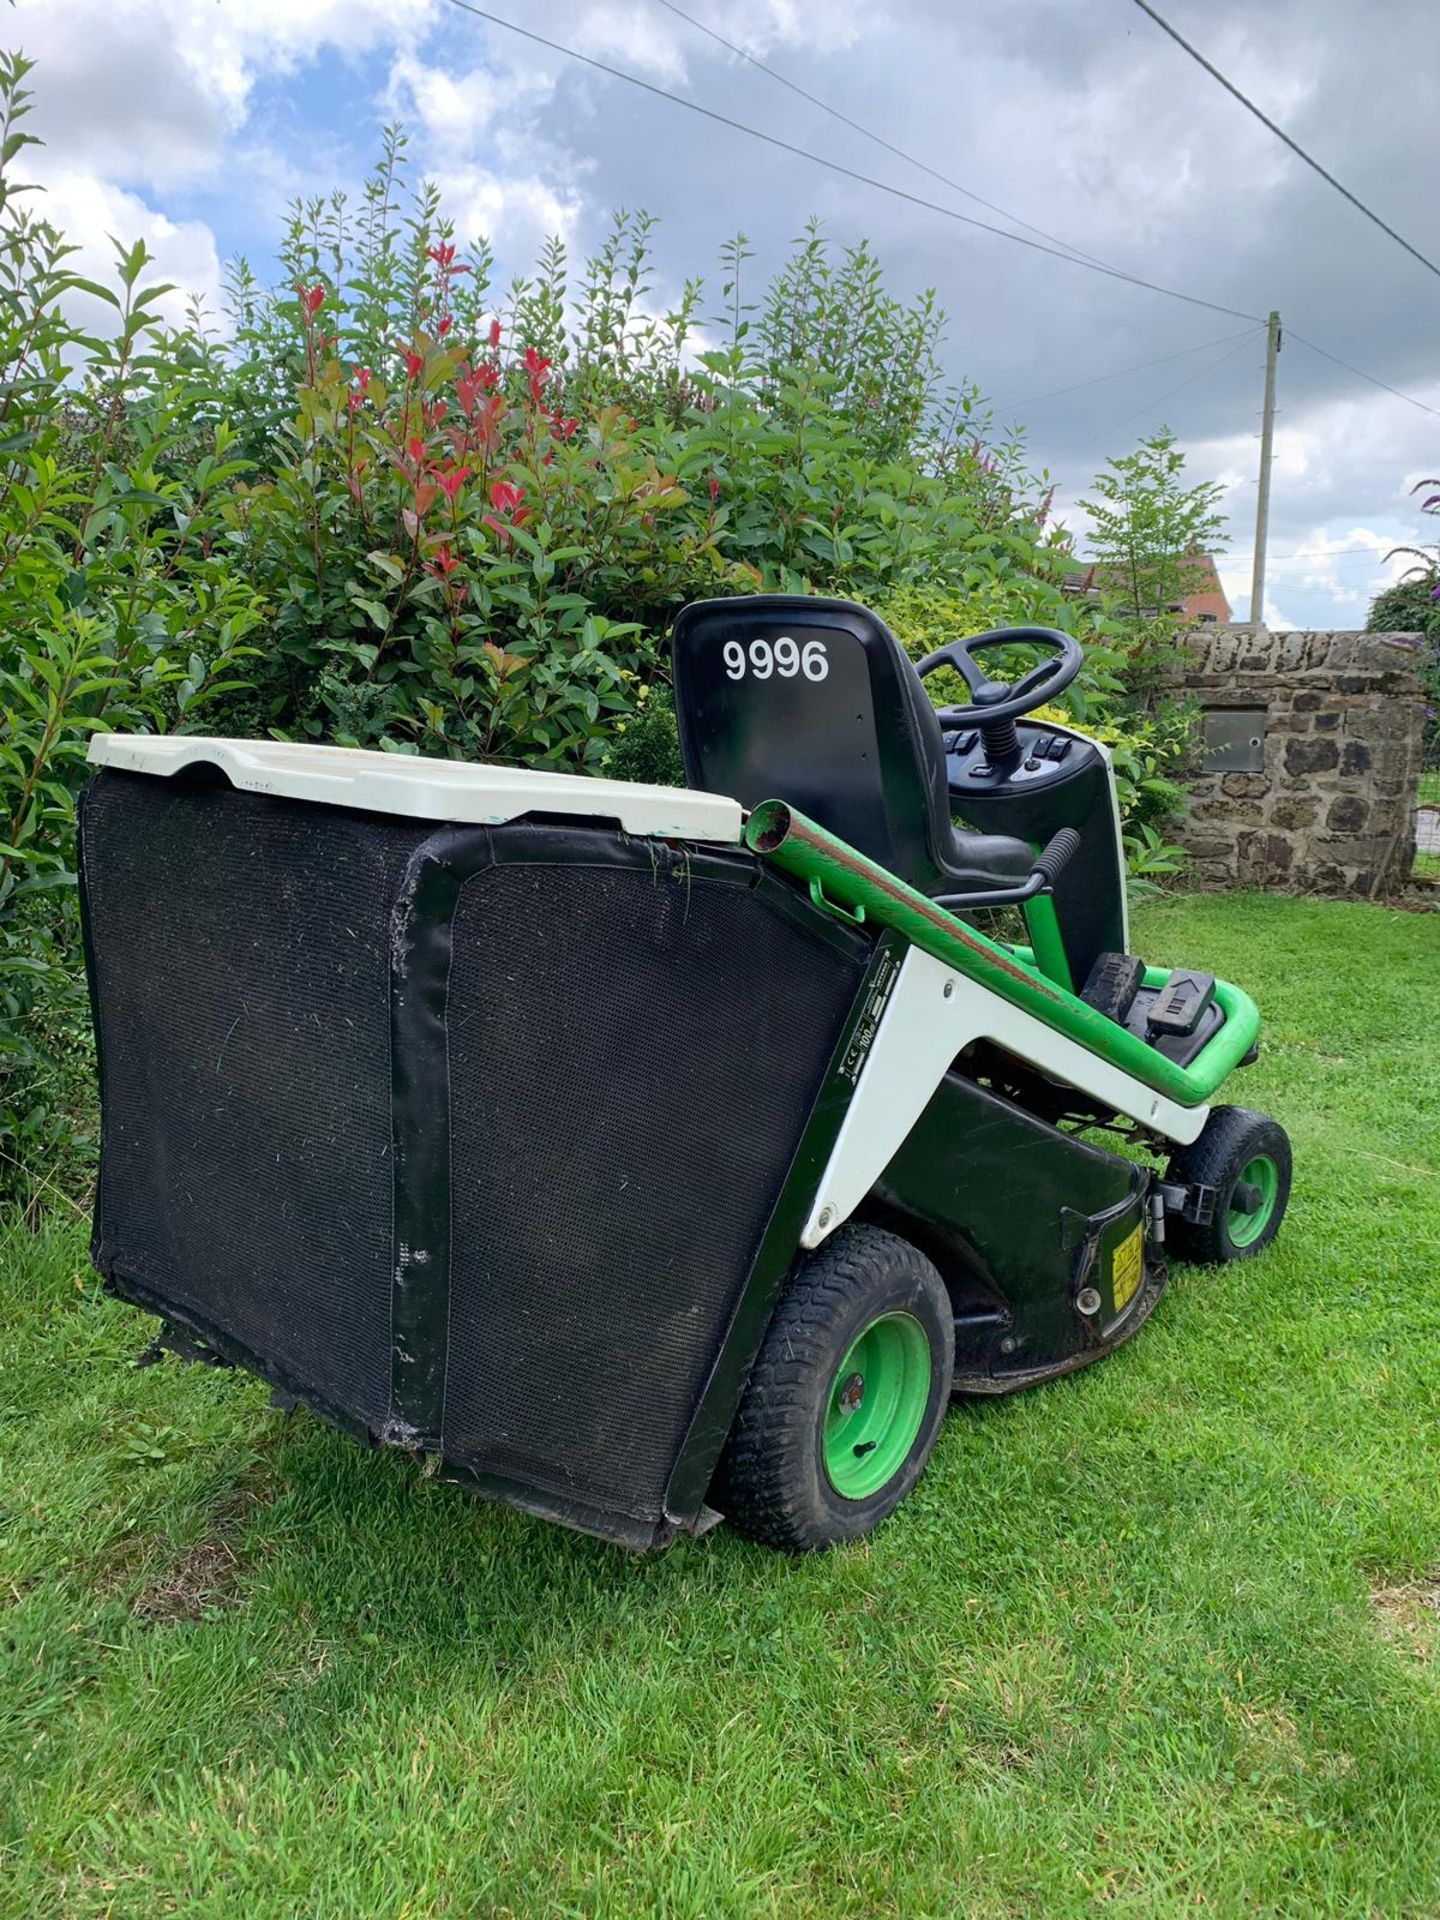 2015 ETESIA HYDRO 80 MKHP 3 RIDE ON LAWN MOWER, 240 KG, 11.9 KW, RUNS AND WORKS *PLUS VAT* - Image 3 of 9